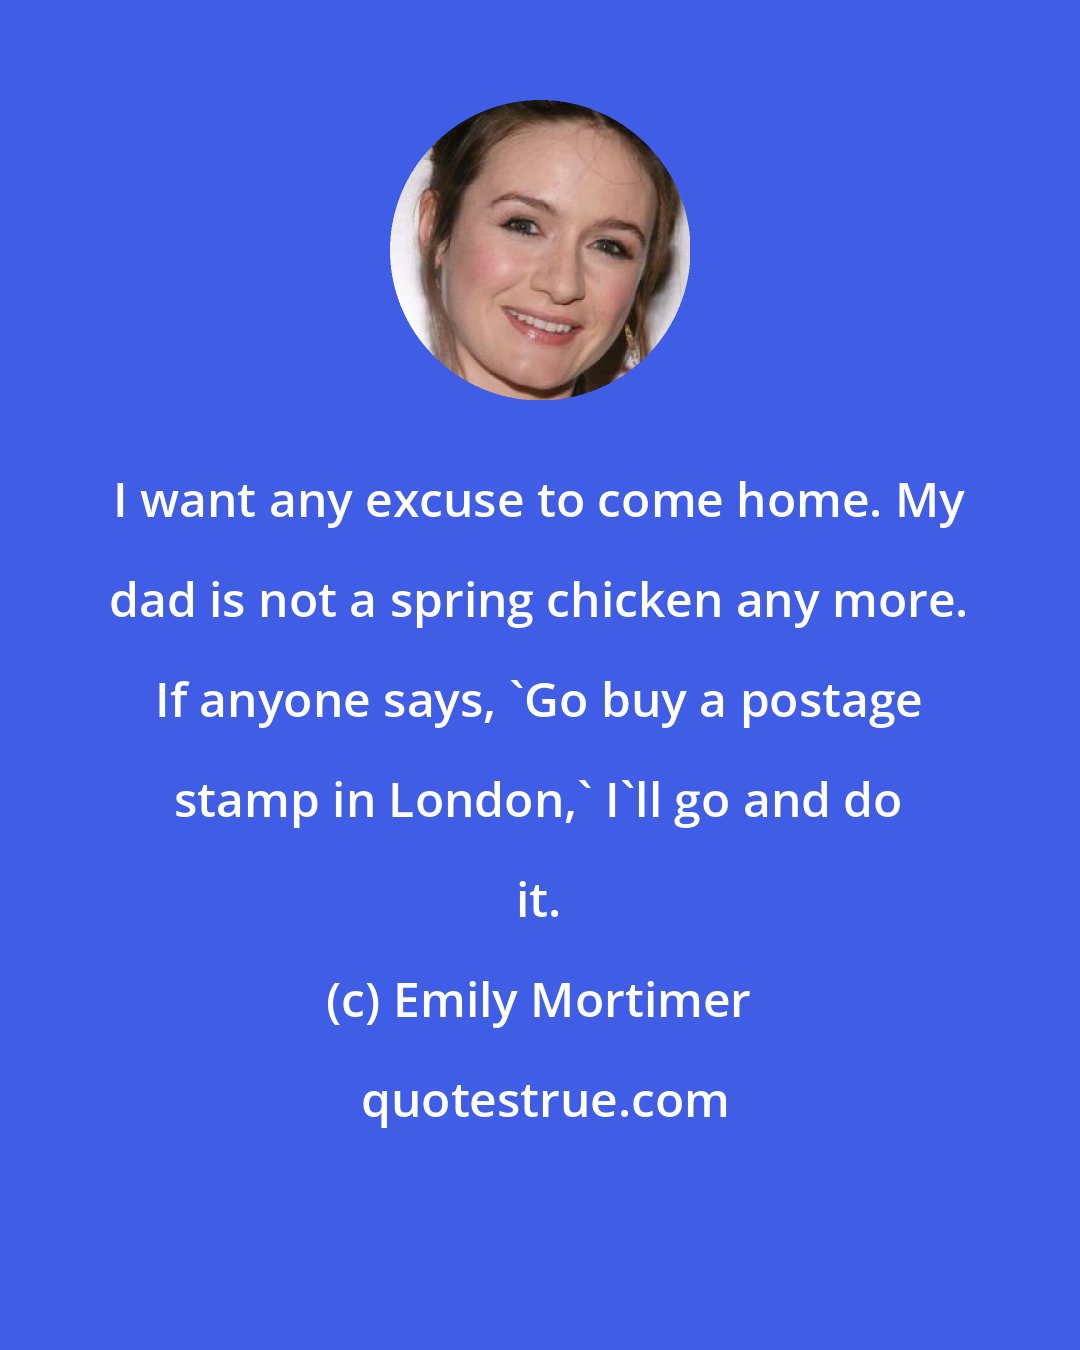 Emily Mortimer: I want any excuse to come home. My dad is not a spring chicken any more. If anyone says, 'Go buy a postage stamp in London,' I'll go and do it.